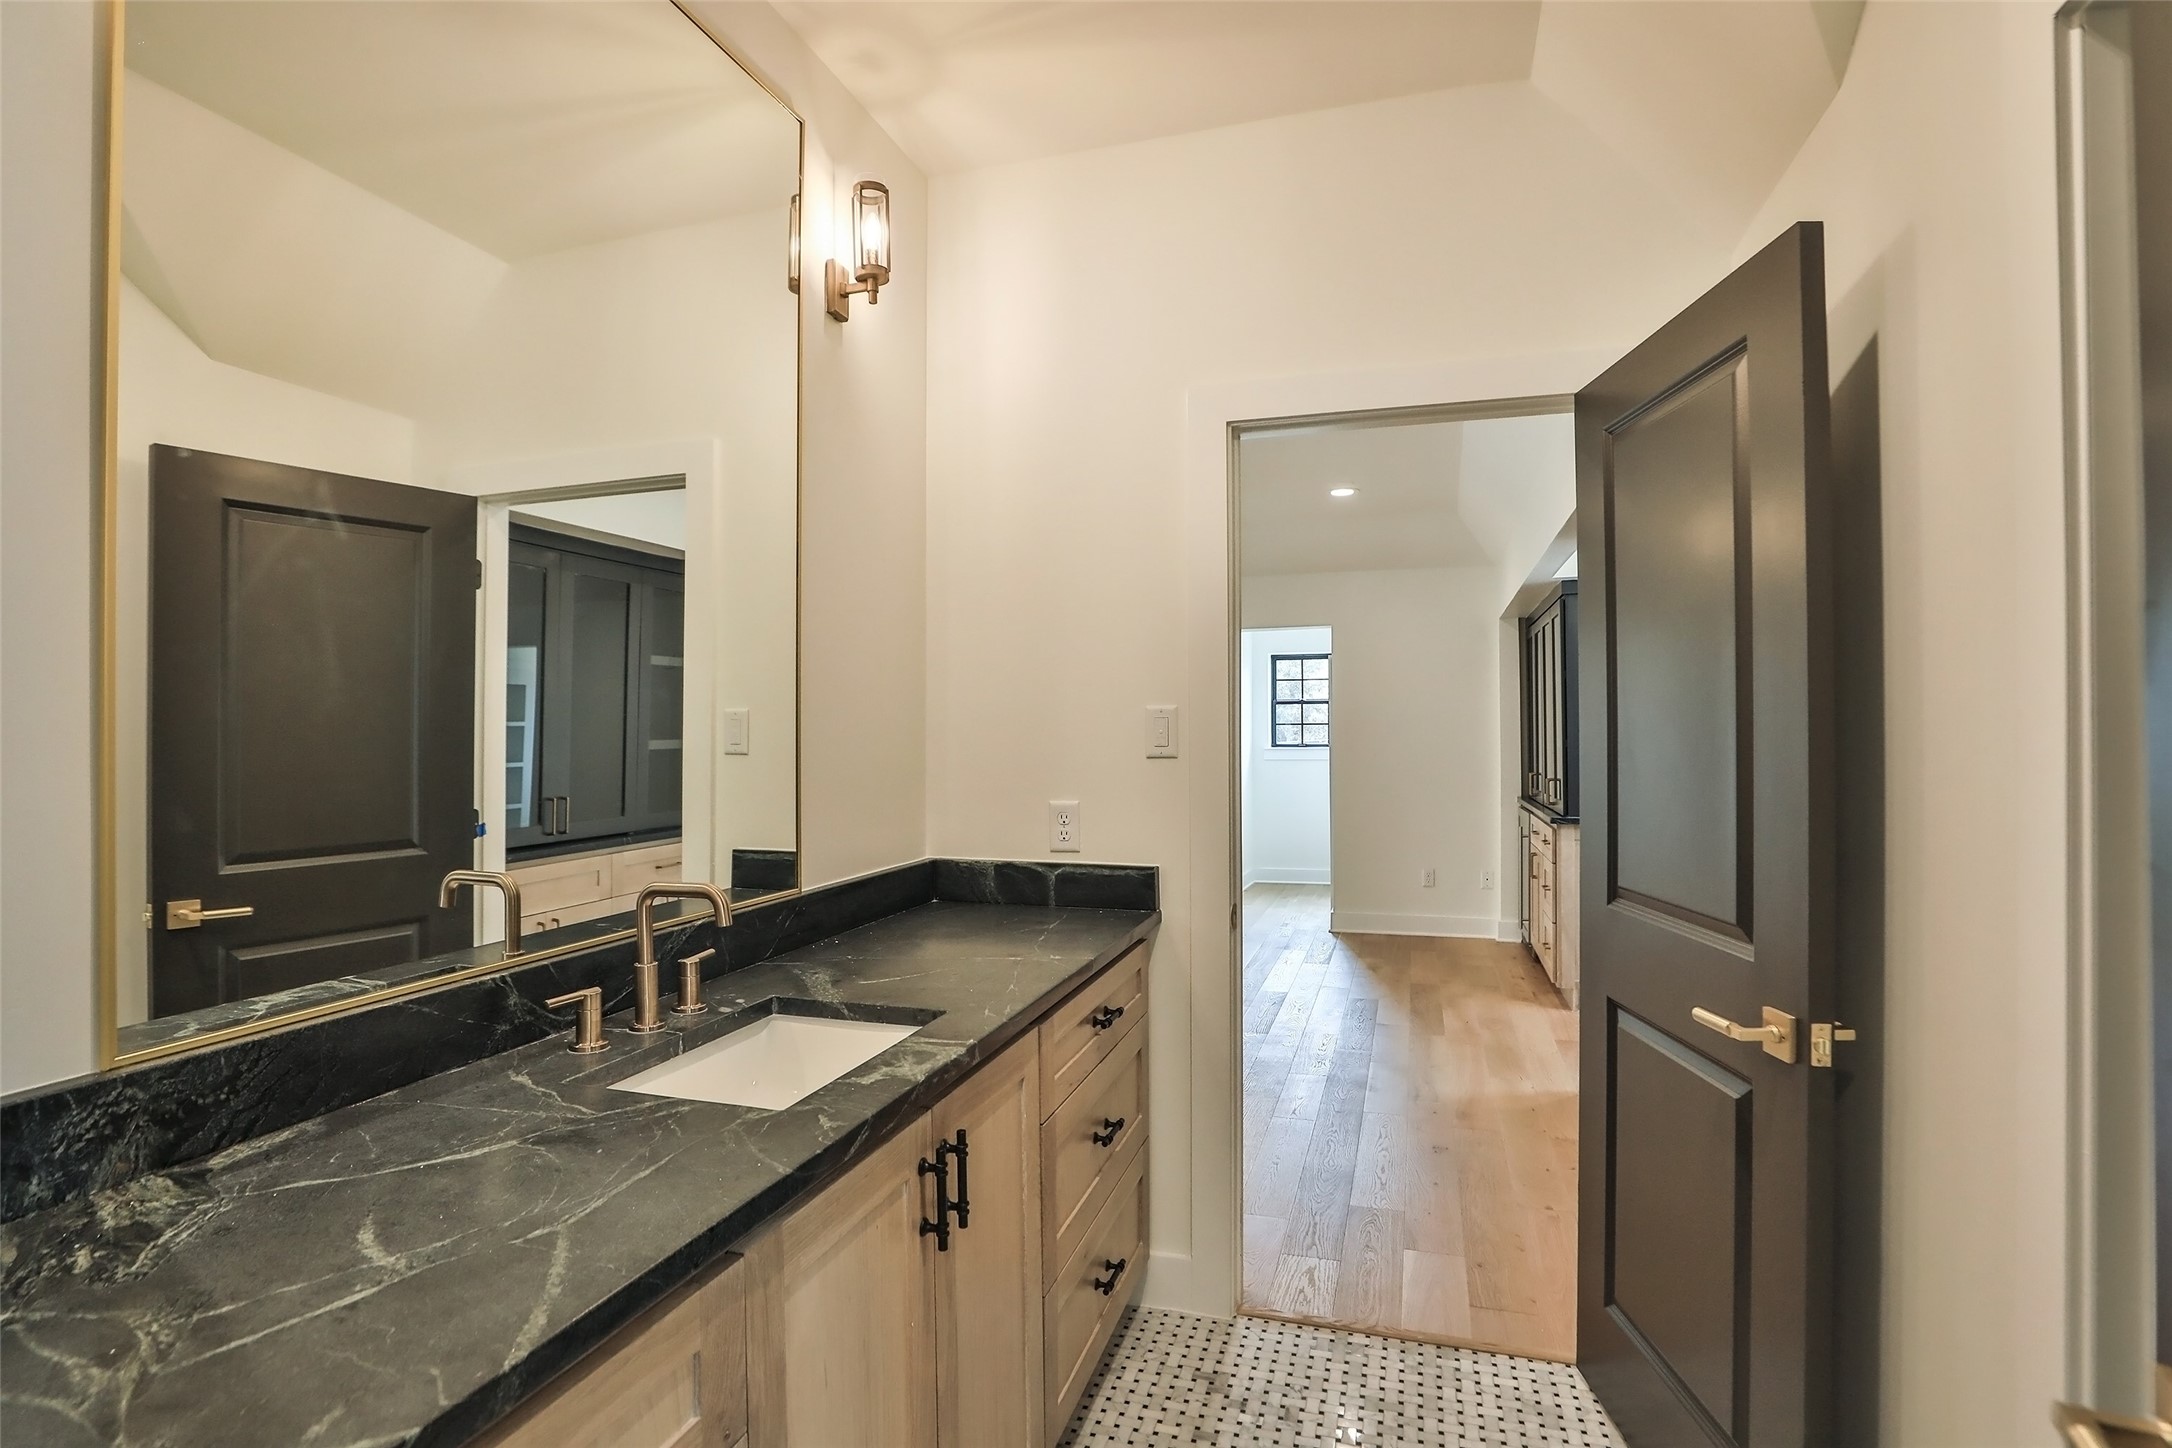 This bathroom opens up a connects the front gathering space and front bedroom. The counters are Soapstone and the flooring is marble basket weave tile.